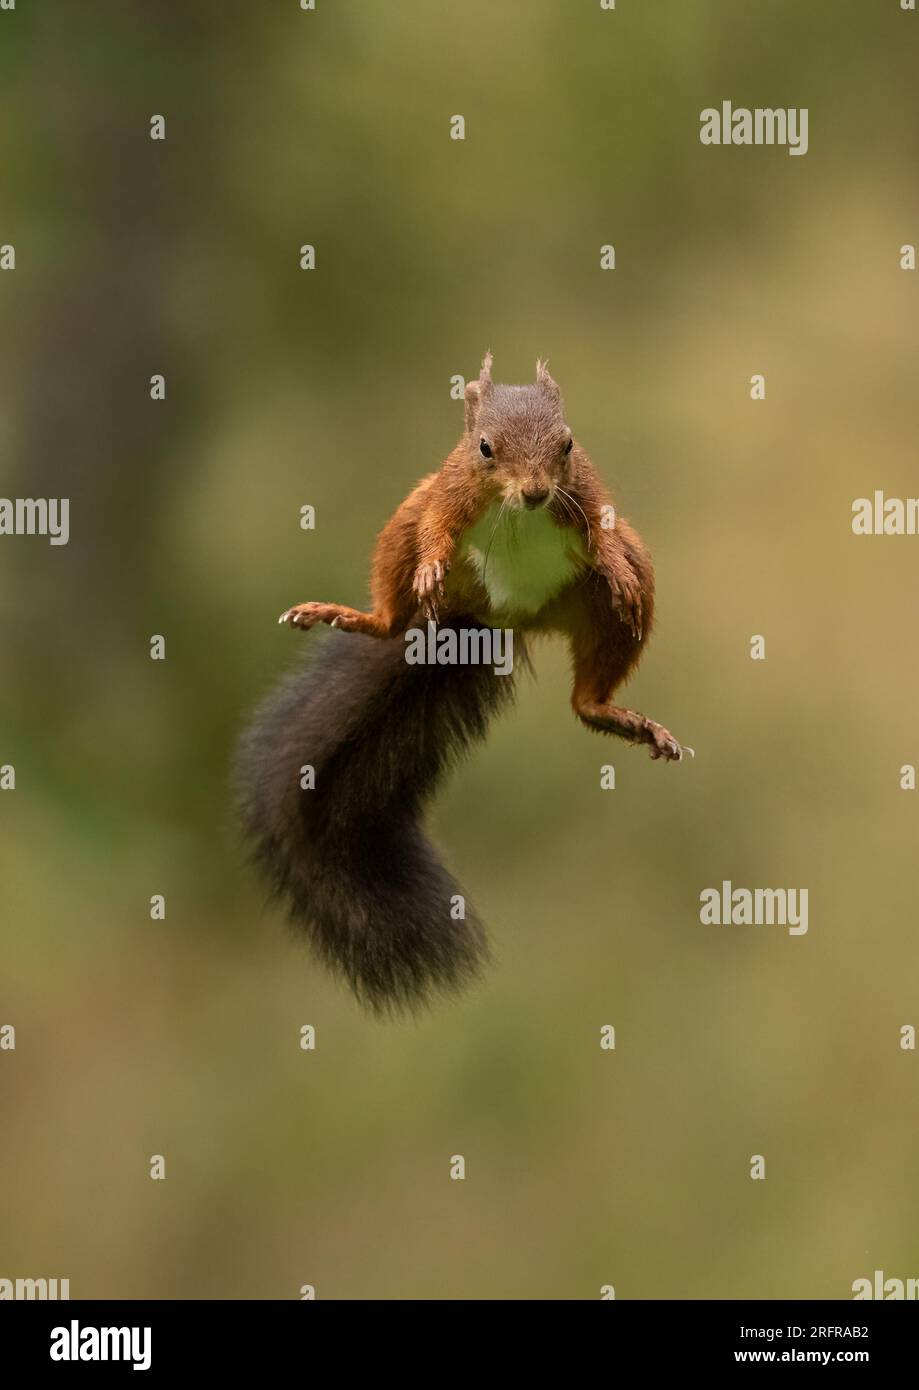 A unique shot of jumping Red Squirrel (Sciuris vulgaris), flying through the air with paws and bushy tail outstretched. Clear background Yorkshire, UK Stock Photo